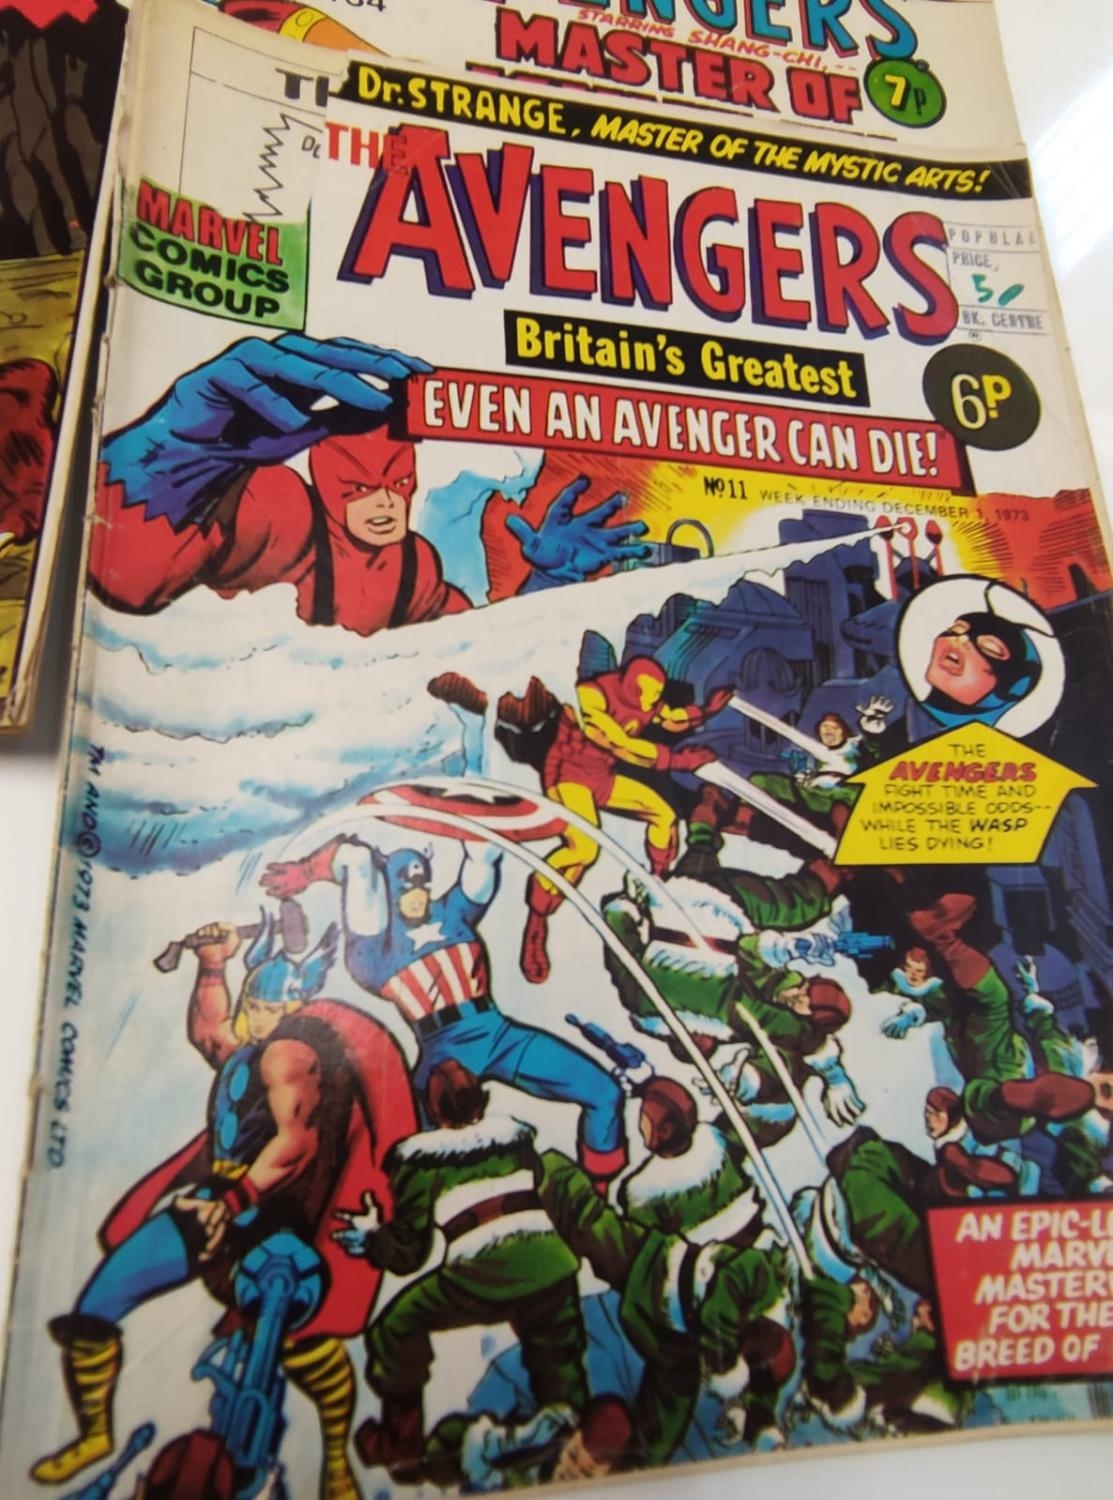 17 editions of Vintage 'The Avengers' Marvel Comics. - Image 3 of 12